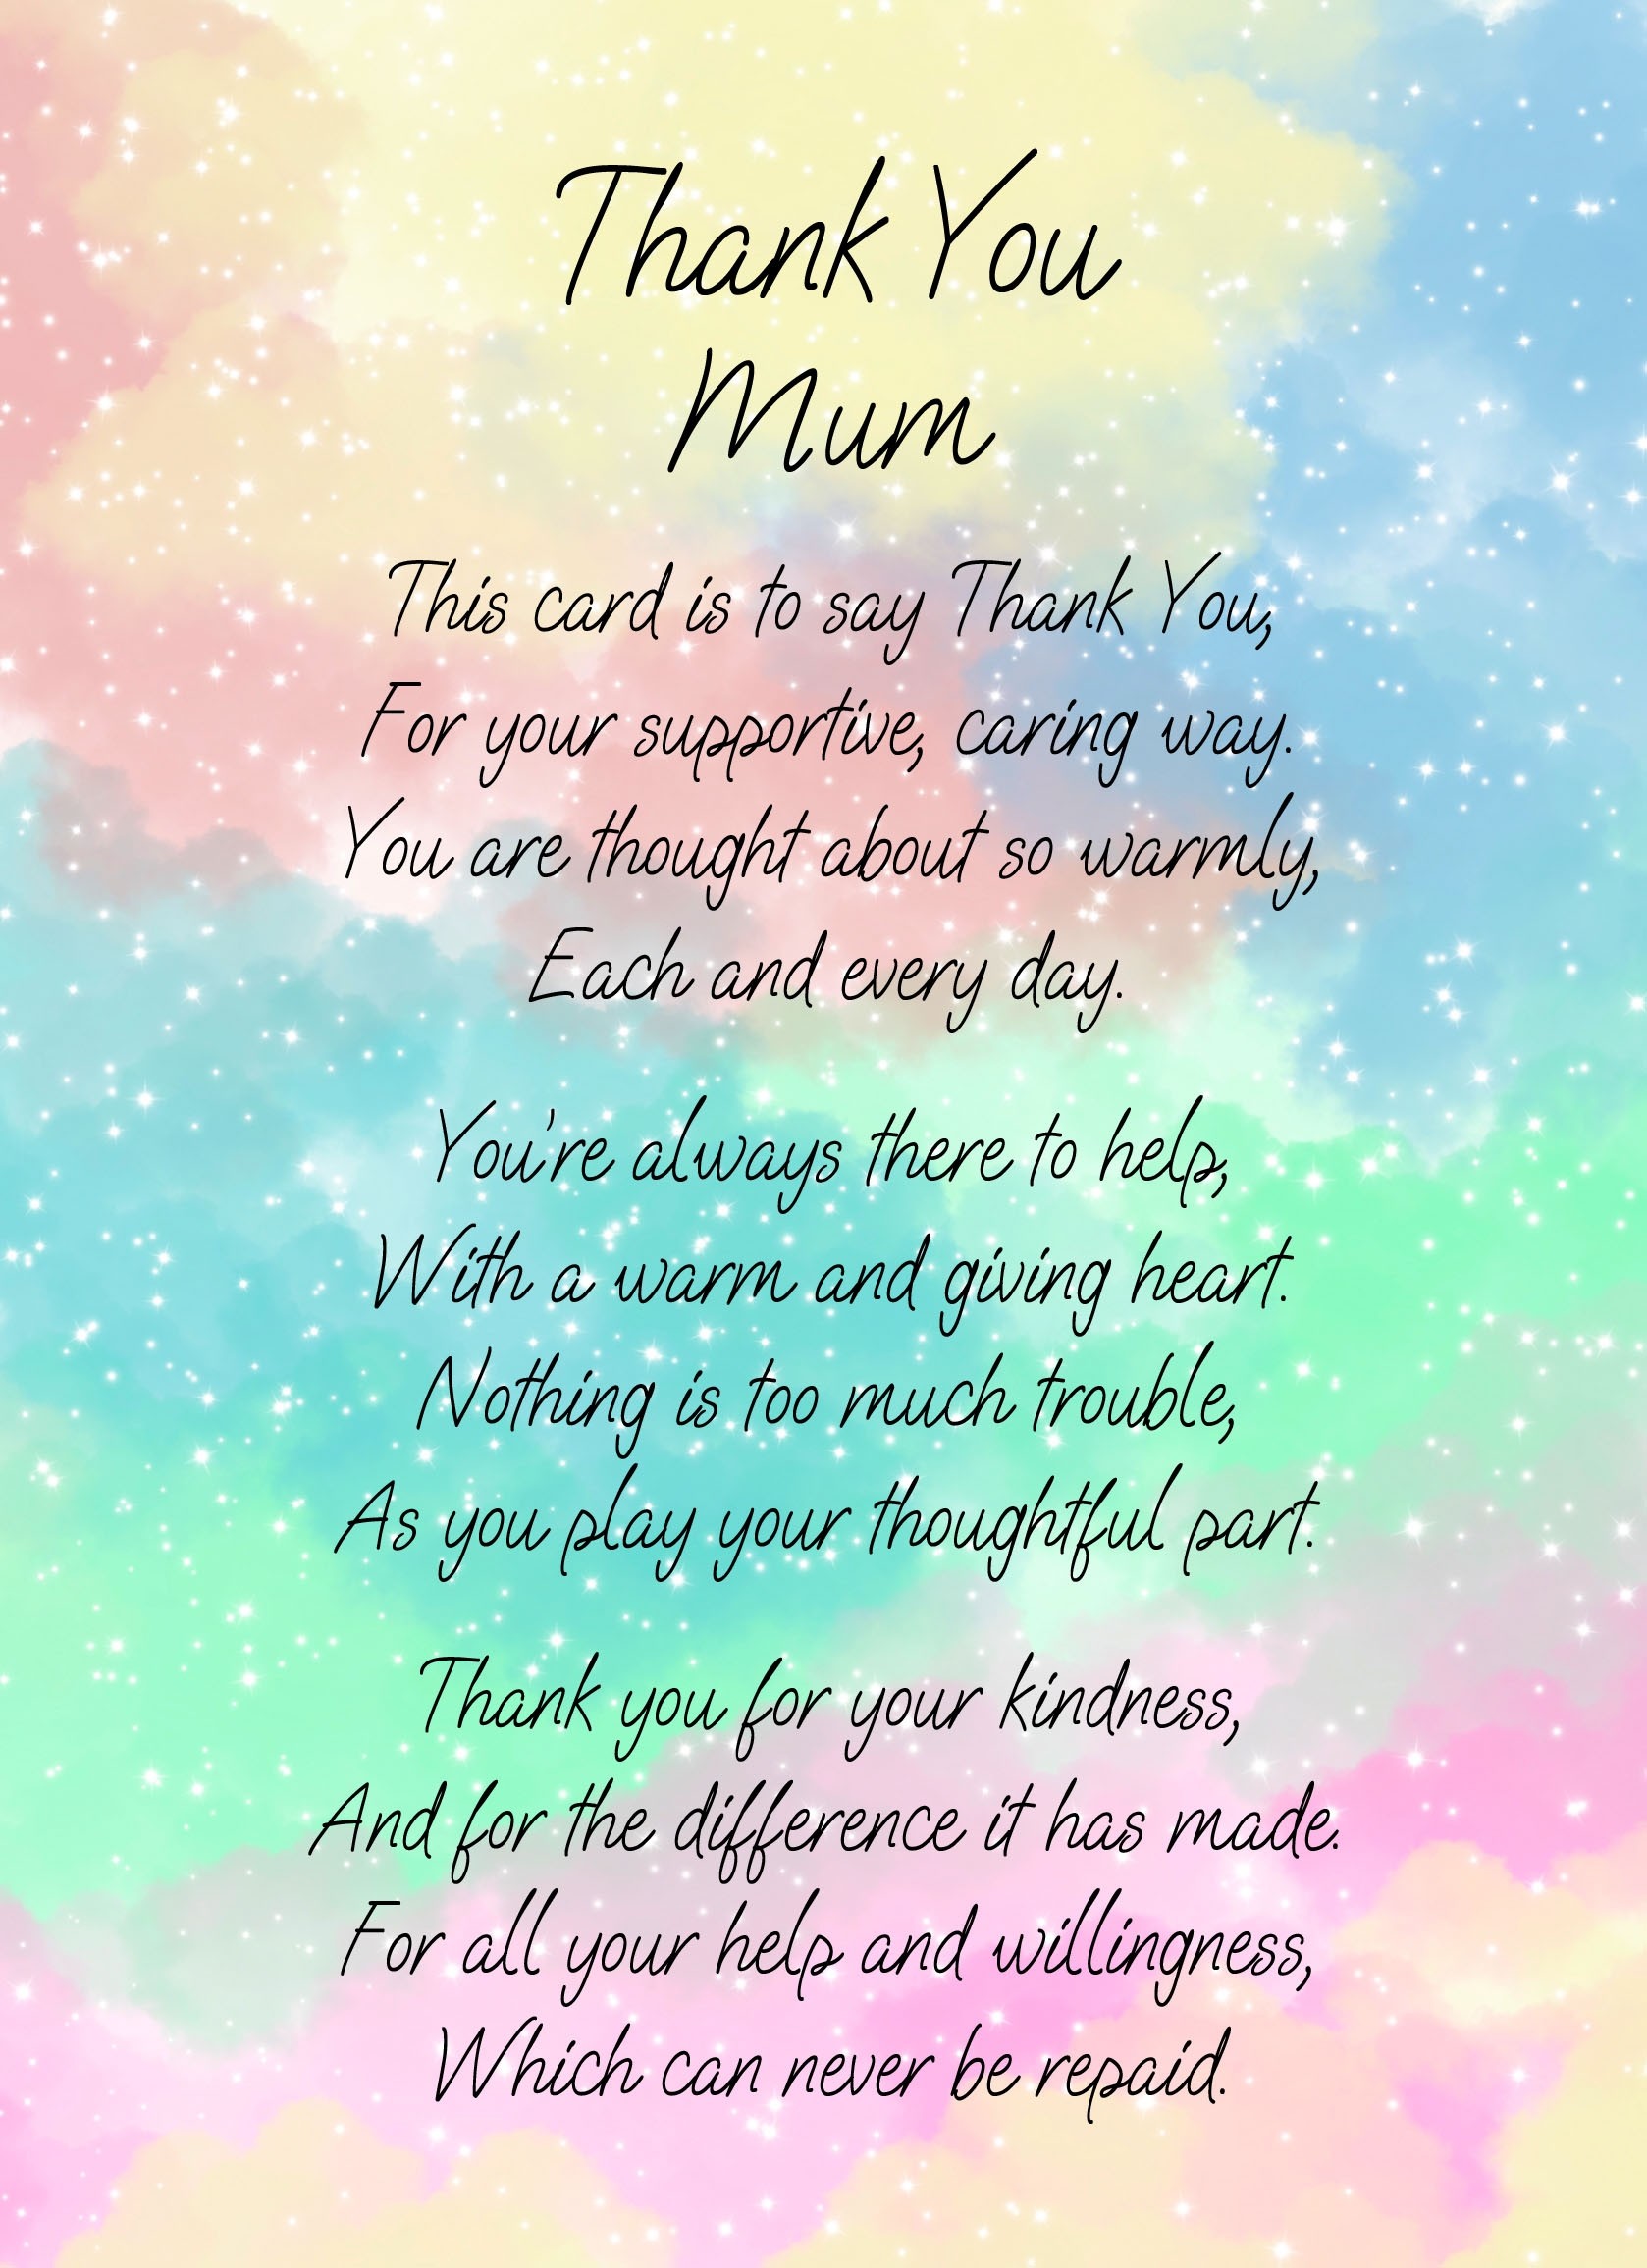 Thank You Poem Verse Card For Mum